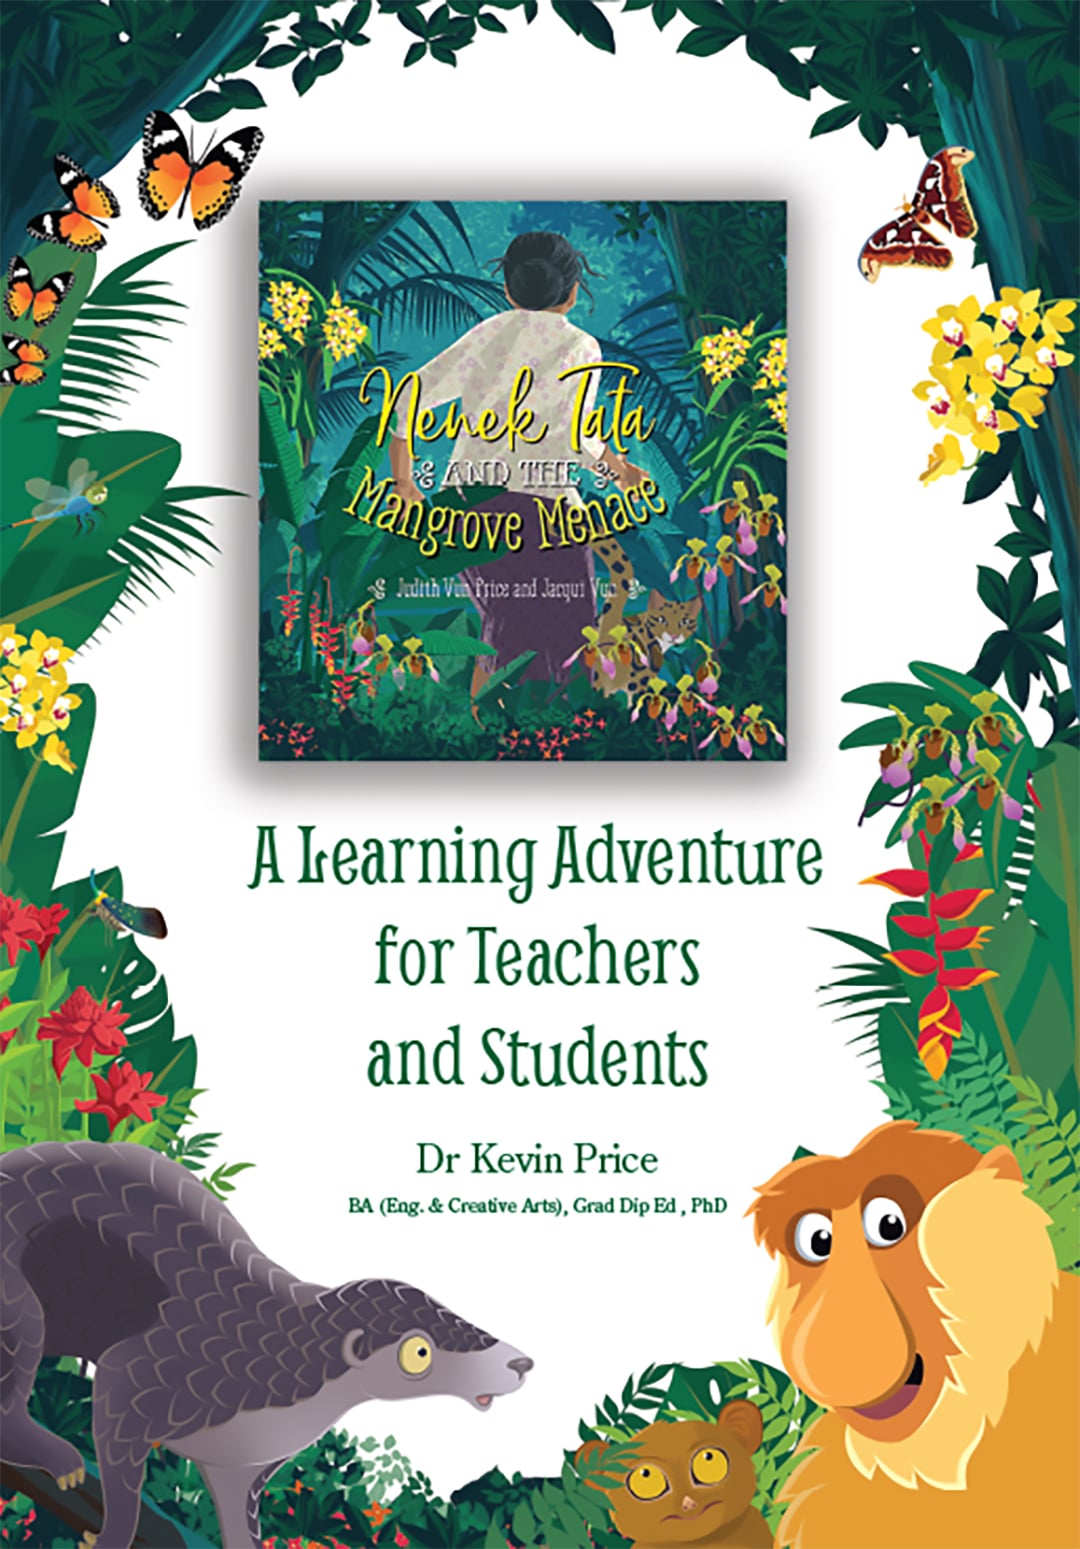 A Learning Adventure for Teachers and Students - PDF BOOKLET